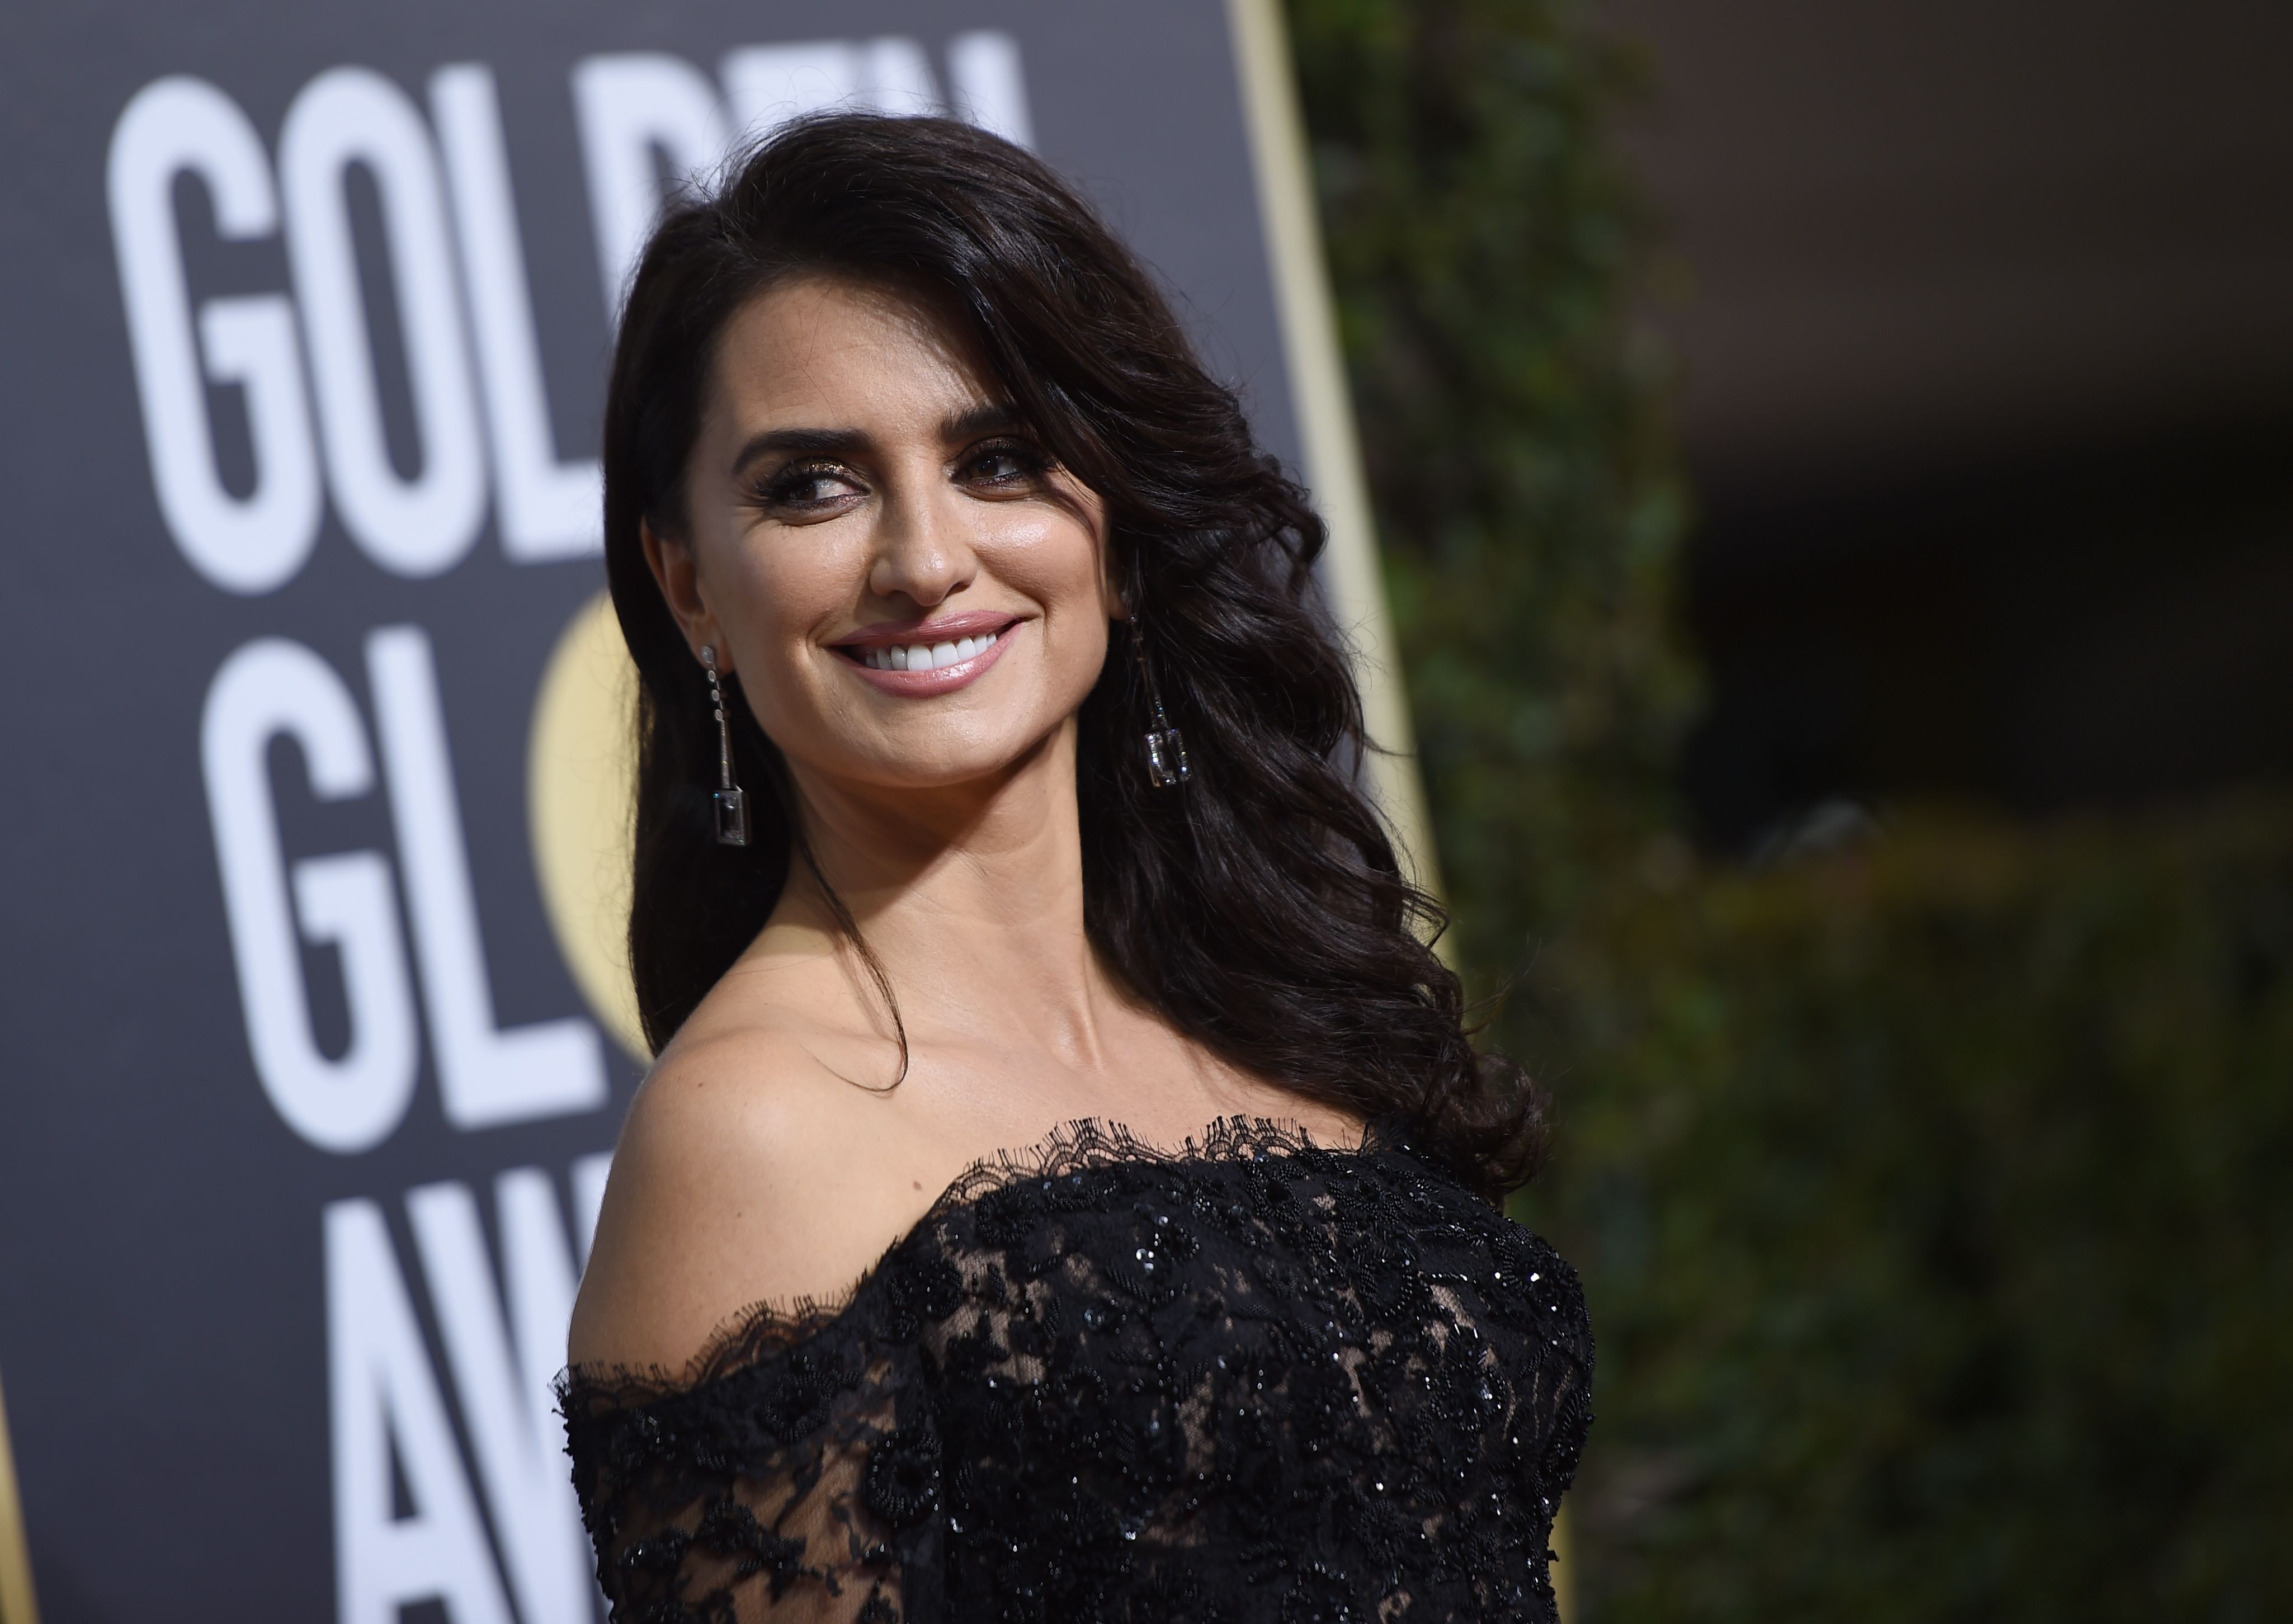 Penelope Cruz arrives for the 75th Golden Globe Awards on January 7, 2018, in Beverly Hills, California. Photo: AFP PHOTO / VALERIE MACON